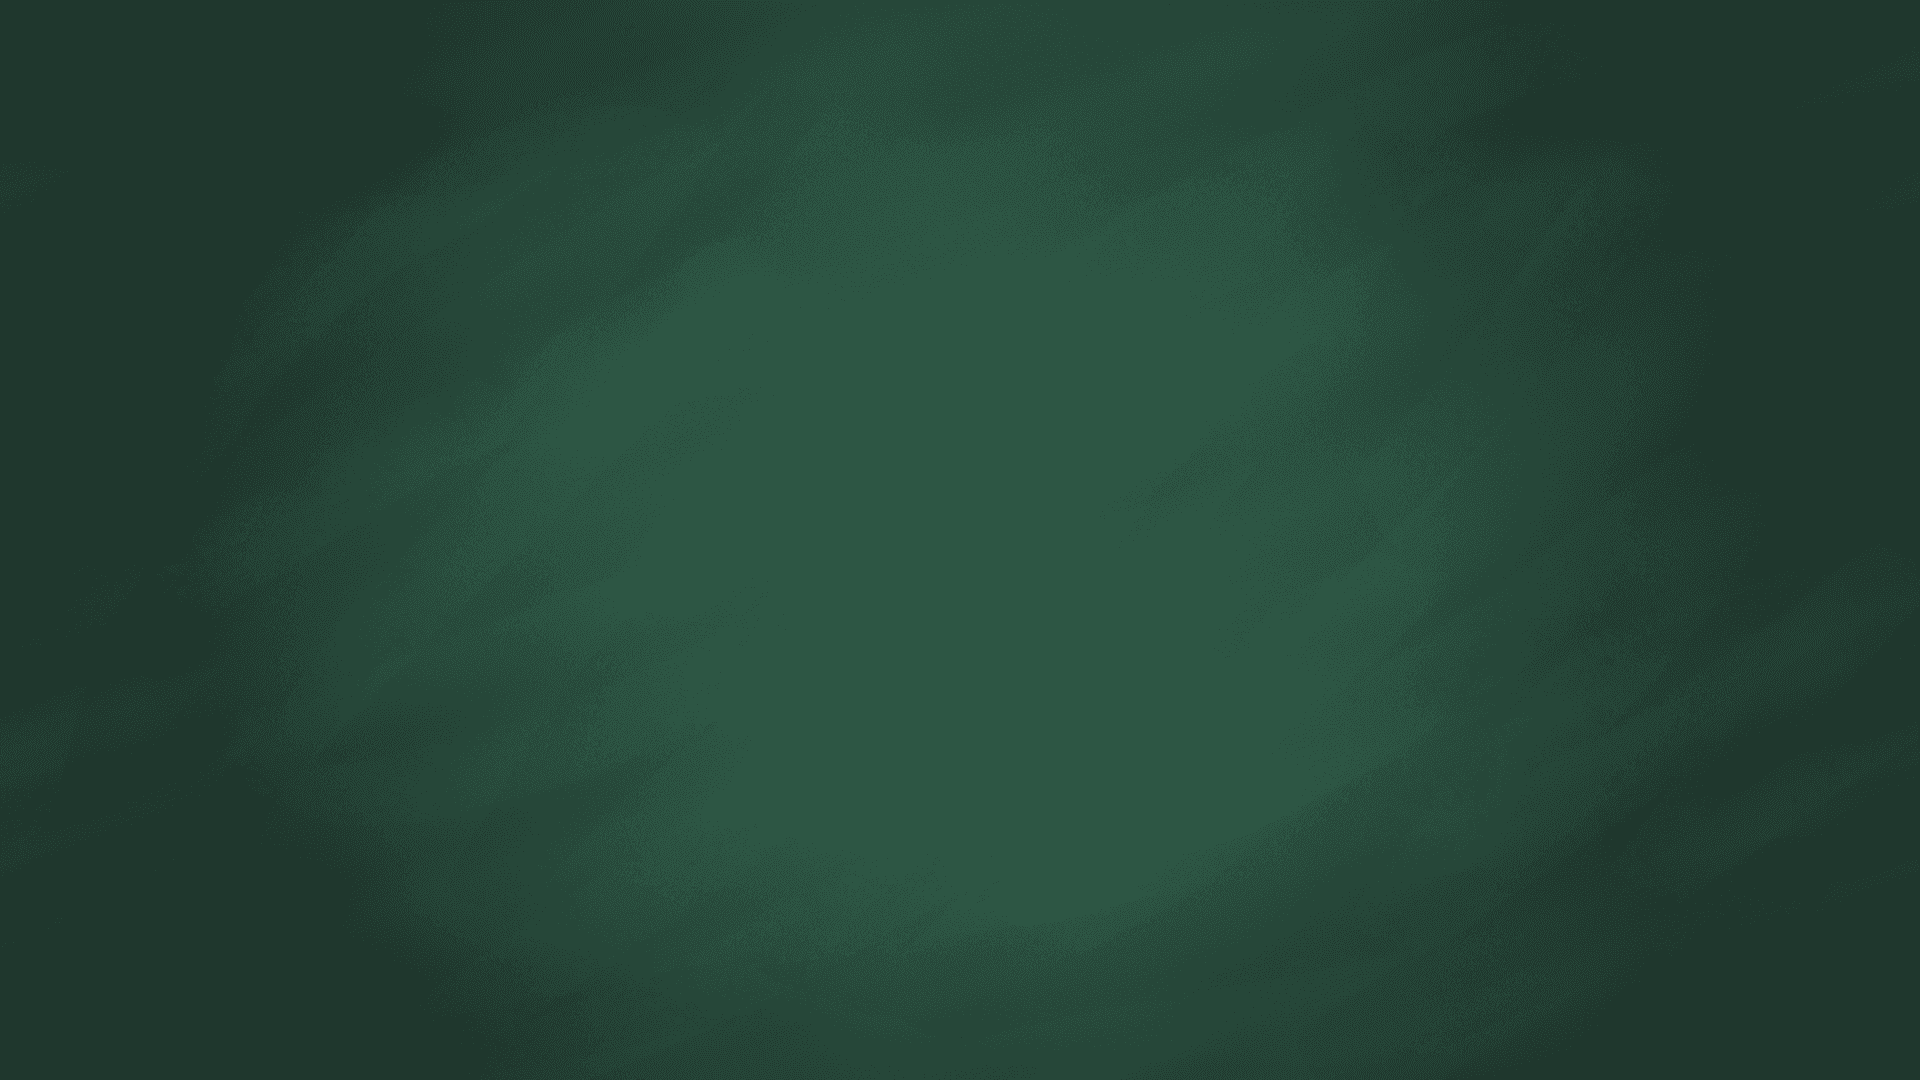 A Green Chalkboard Background With A White Background